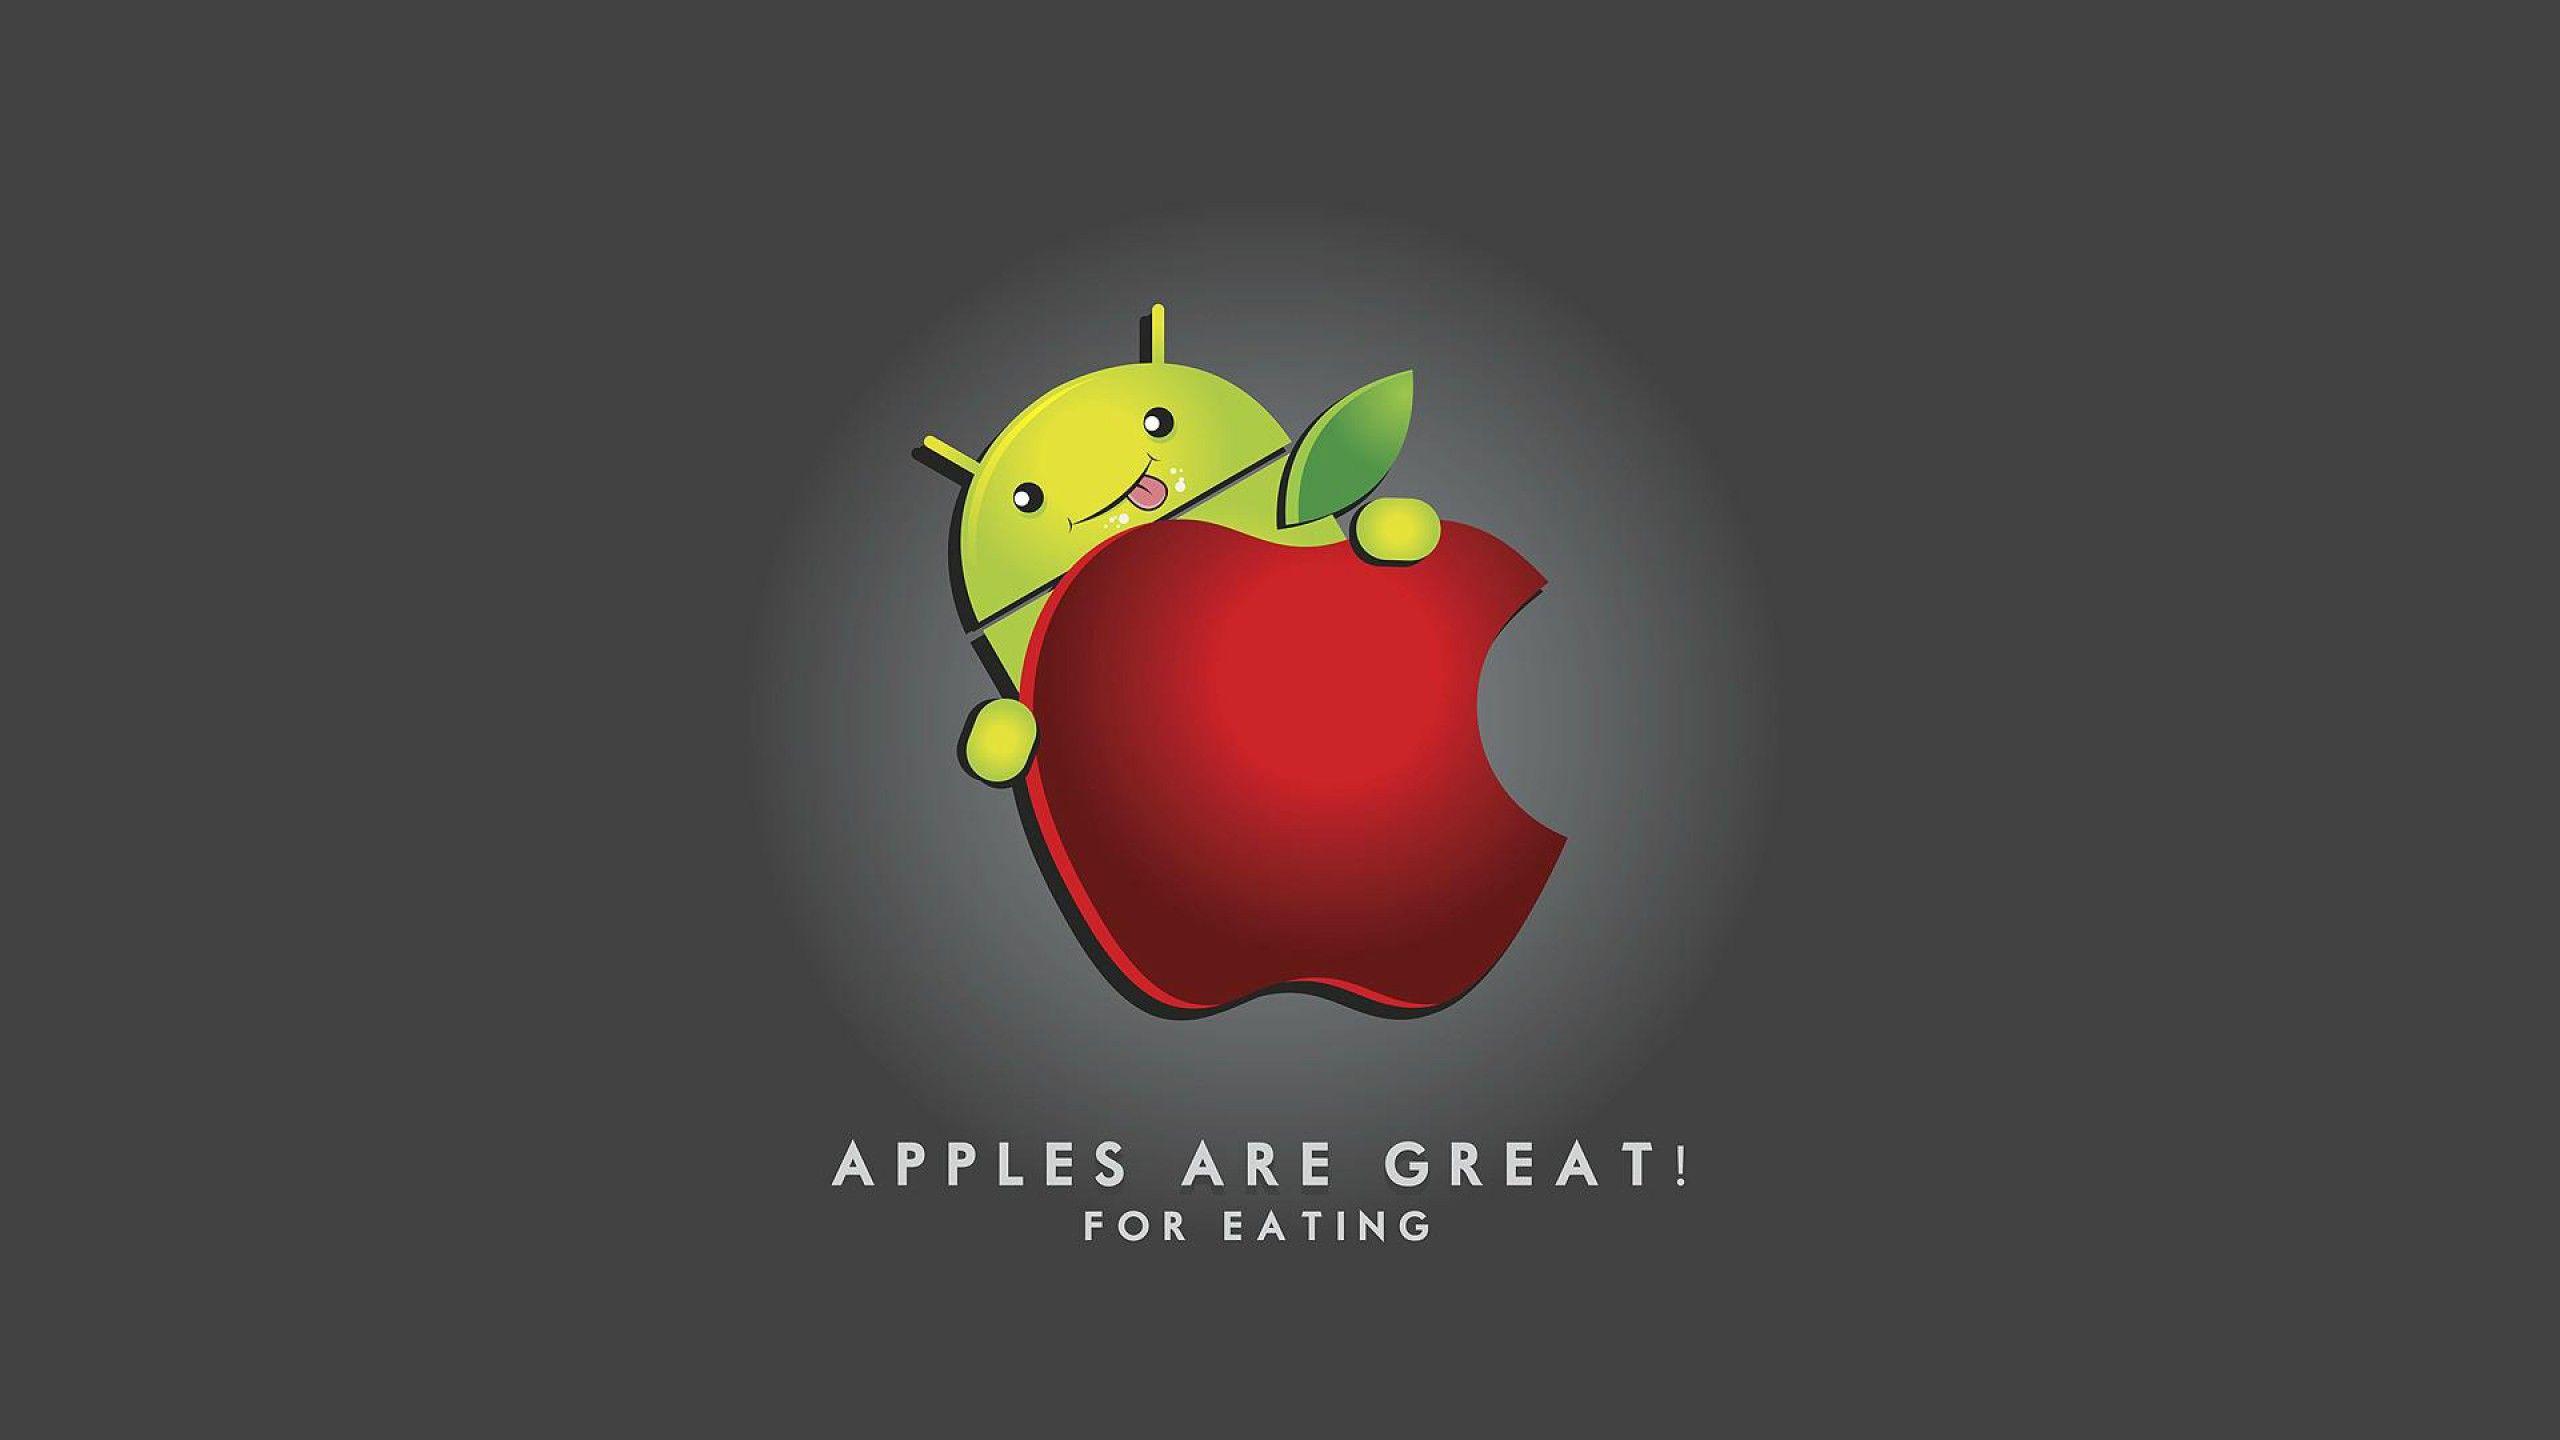 Apples Are Great For Eating Apple vs Android Wallpaper